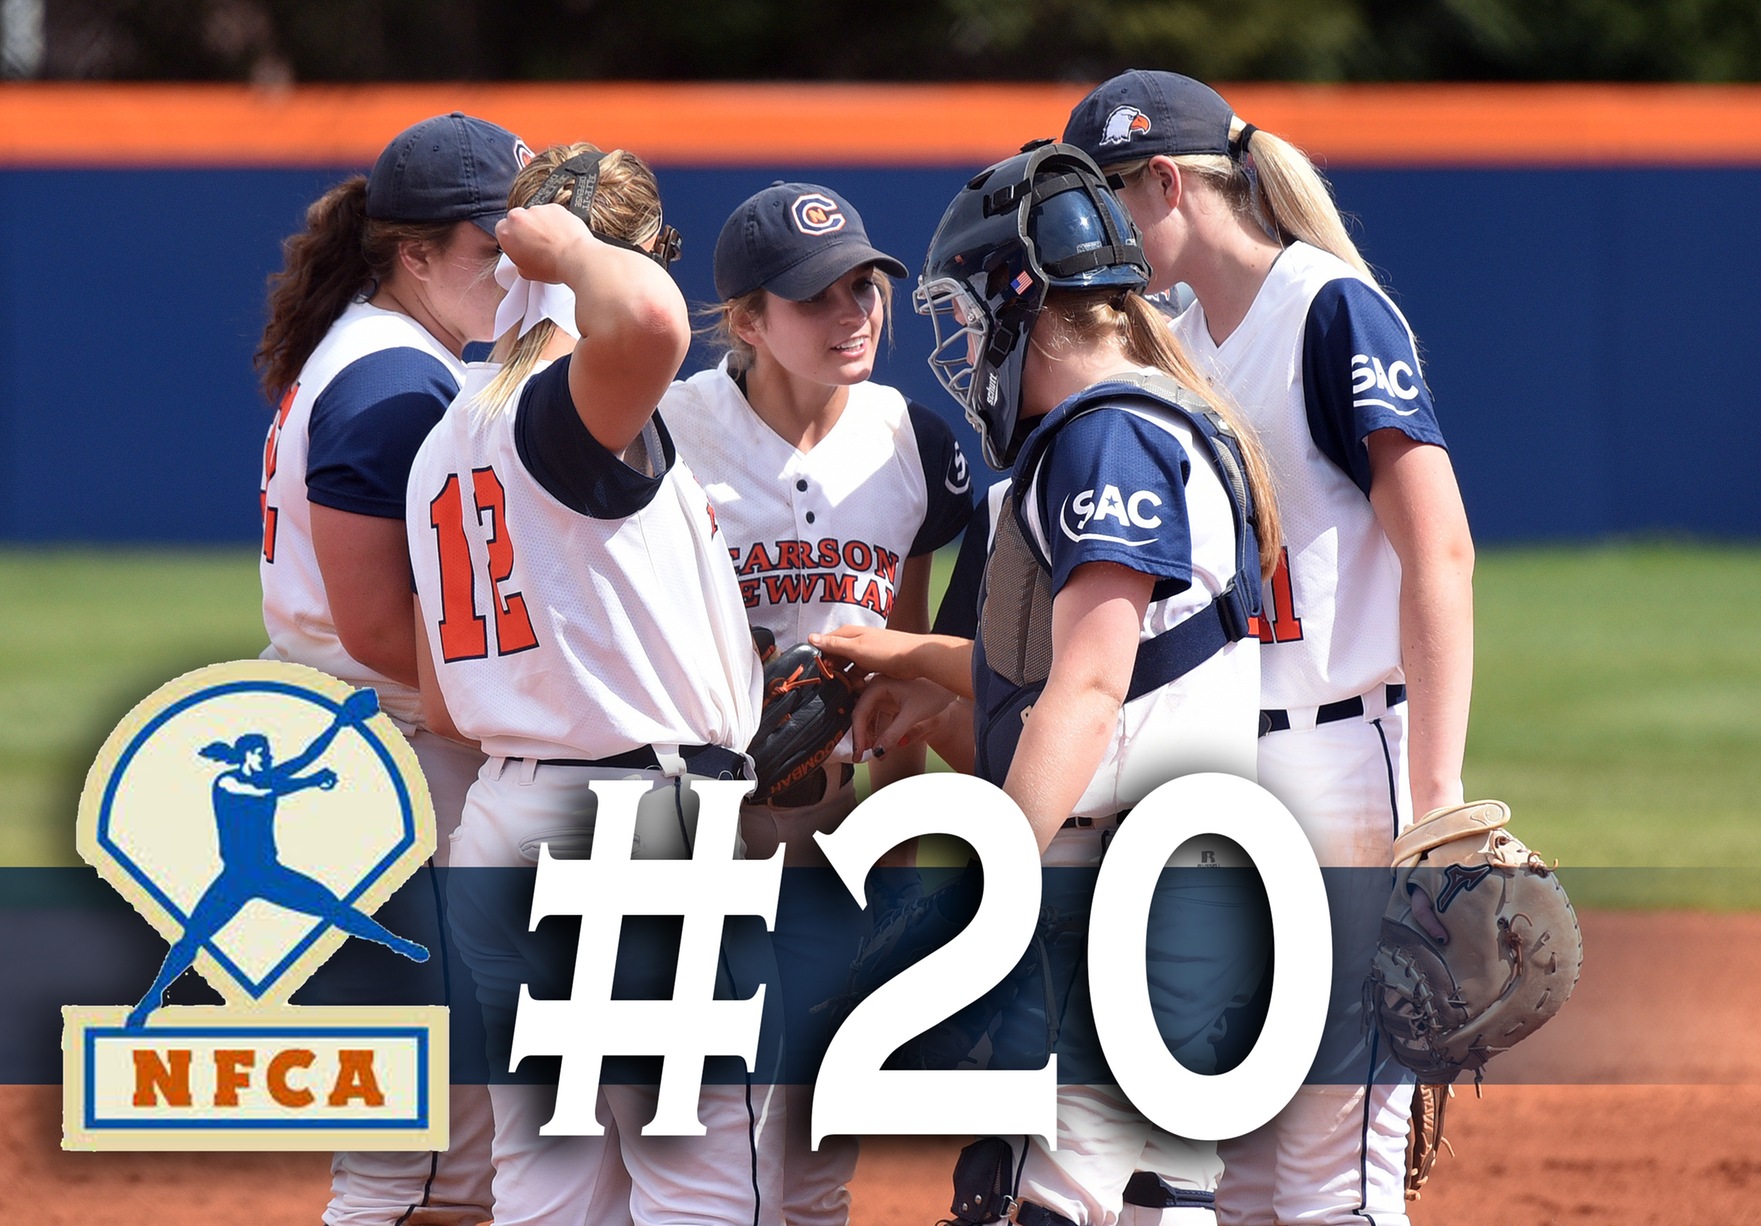 Carson-Newman softball starts 2018 ranked in NFCA top 20